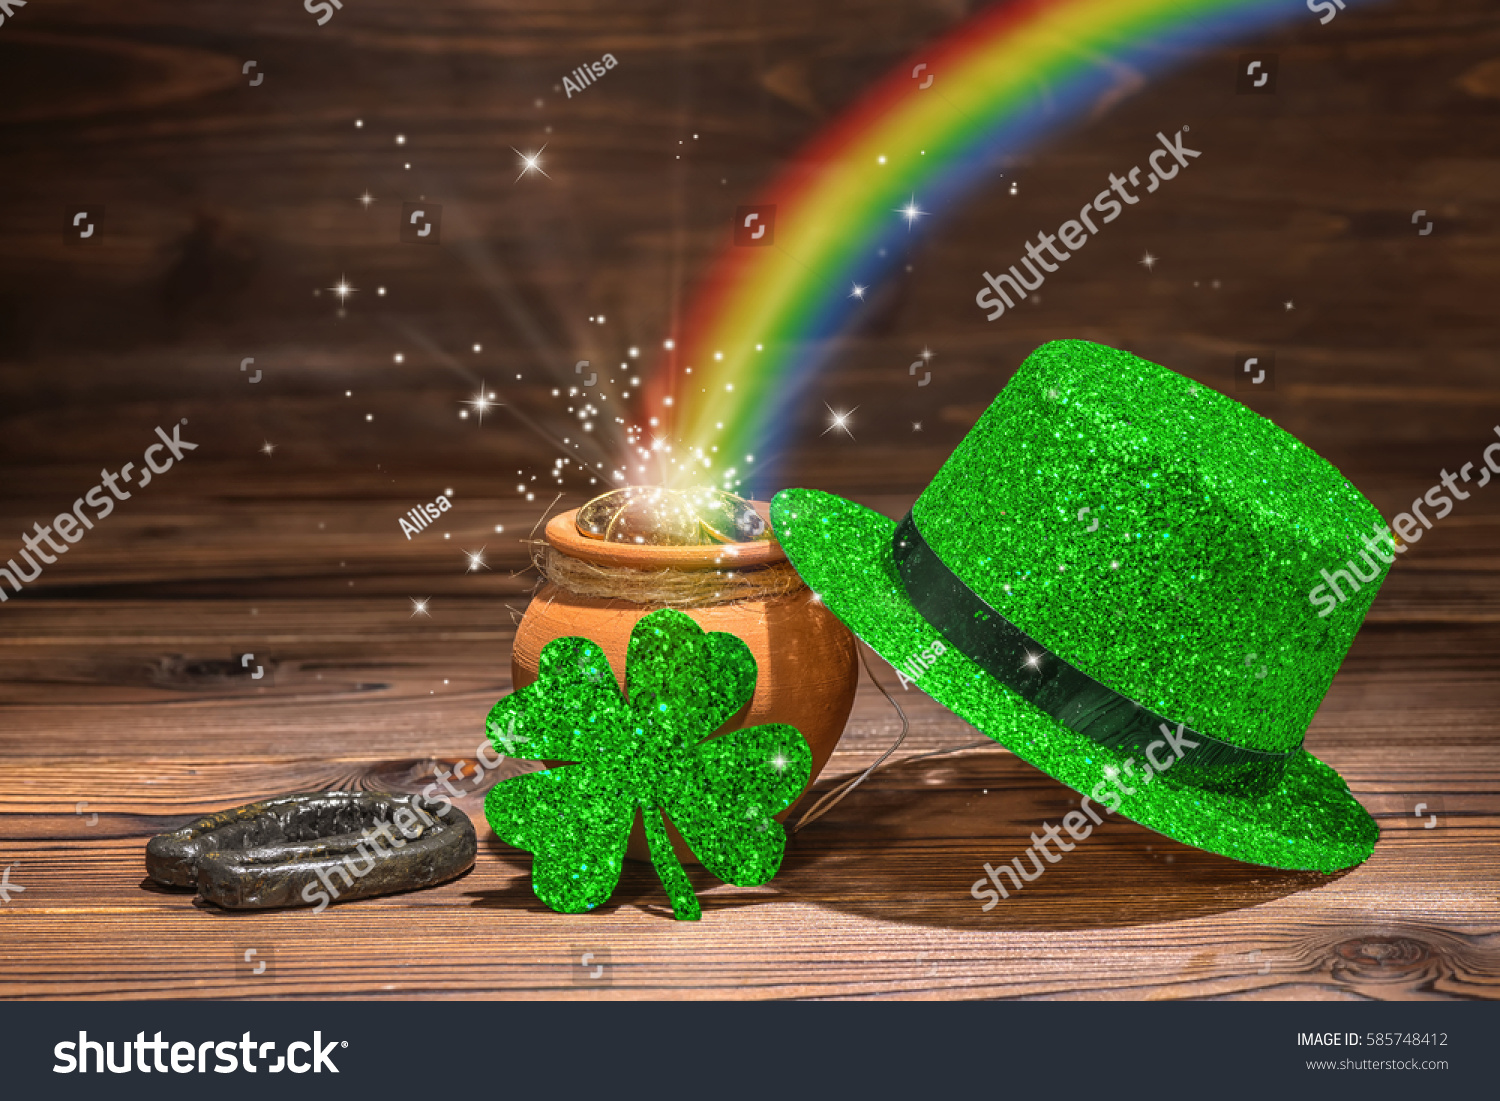 St Patricks day decoration with magic light rainbow pot full gold coins, horseshoe, green hat and shamrock on vintage wooden background, close up #585748412